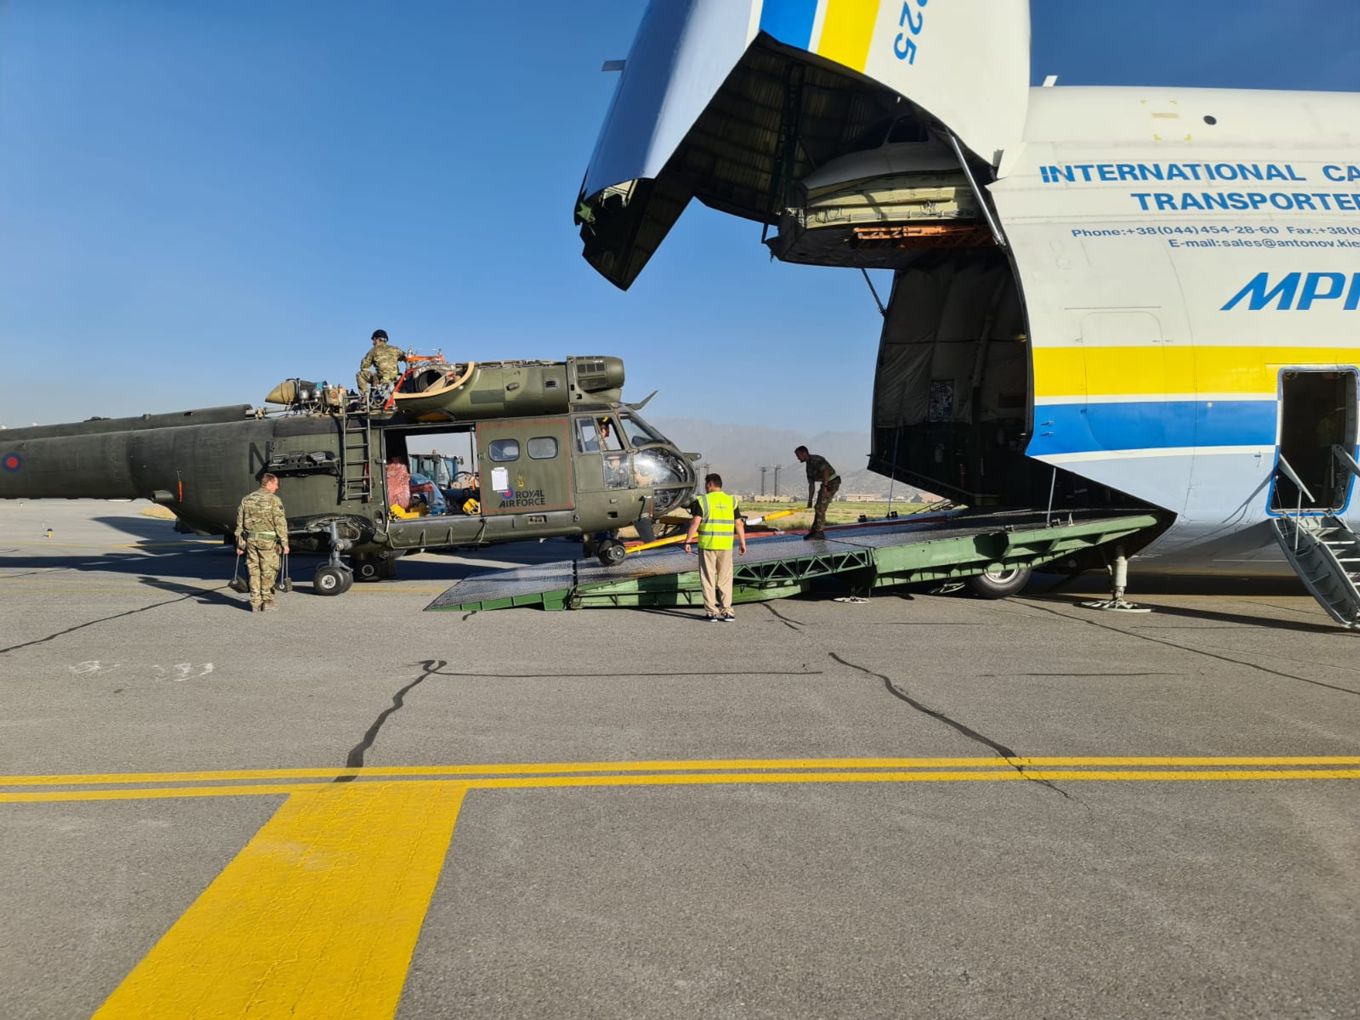 Image shows RAF Puma helicopter being loaded into an Antonov AN-225 aircraft.